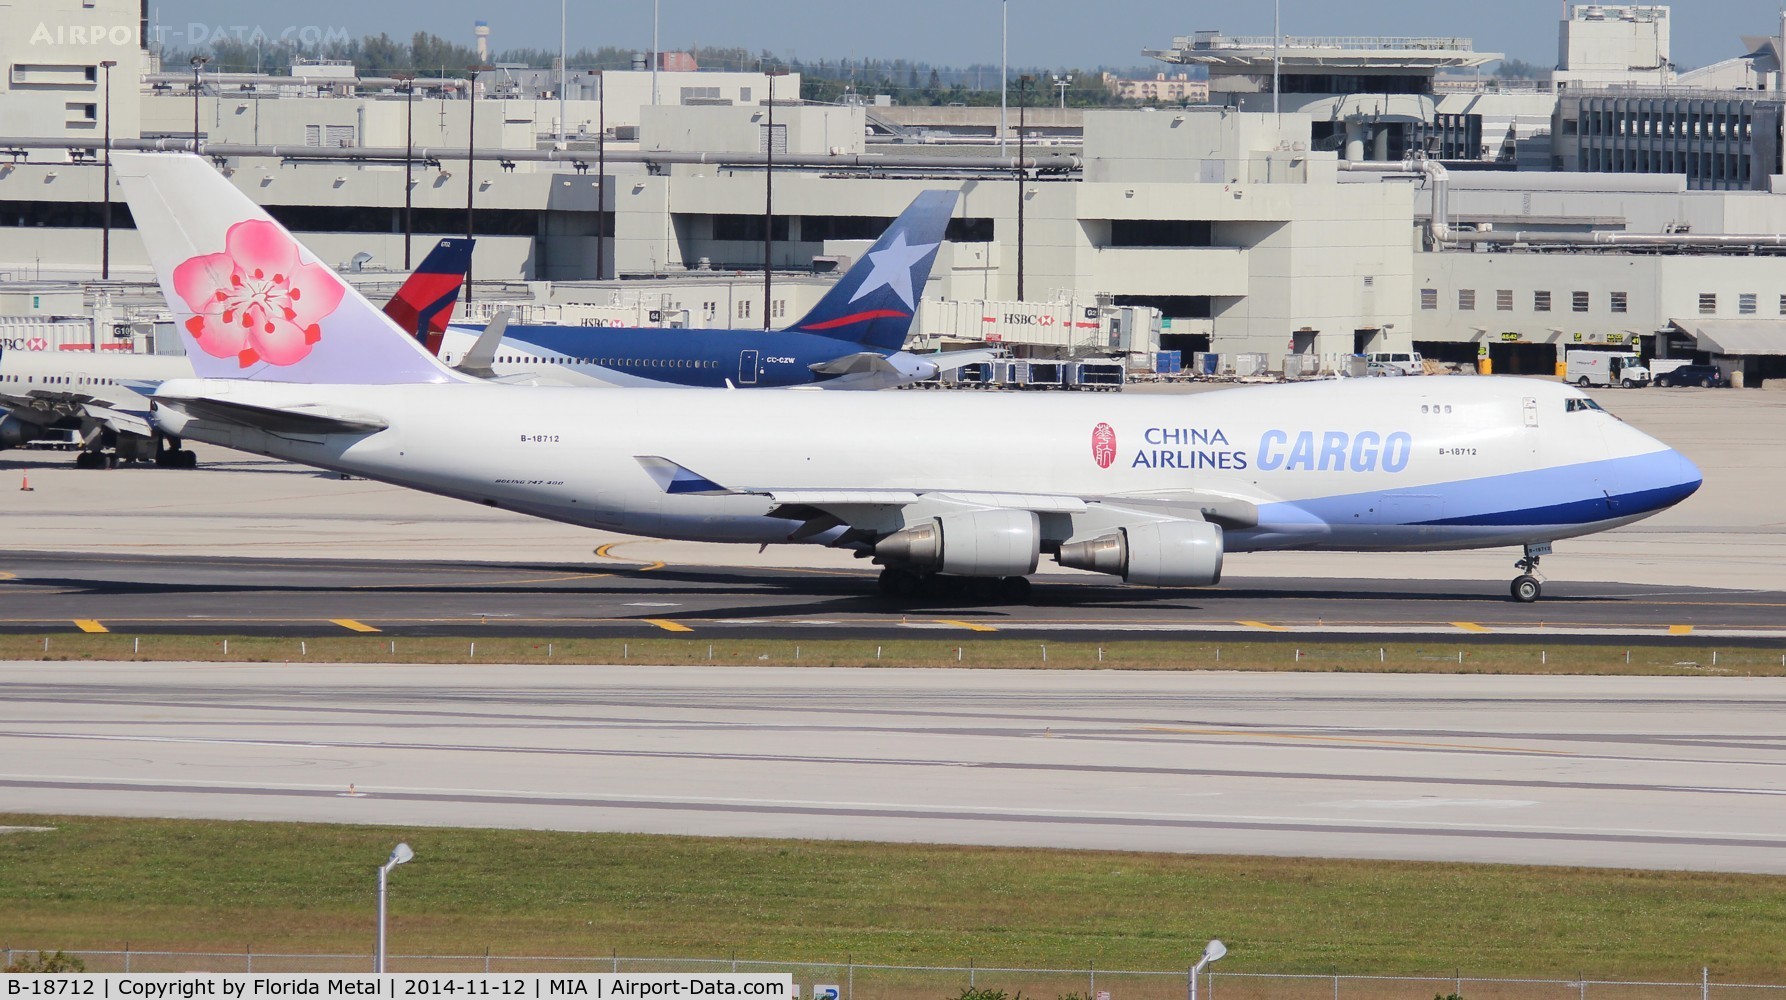 B-18712, 2003 Boeing 747-409F/SCD C/N 33729, China Airlines Cargo 747-400